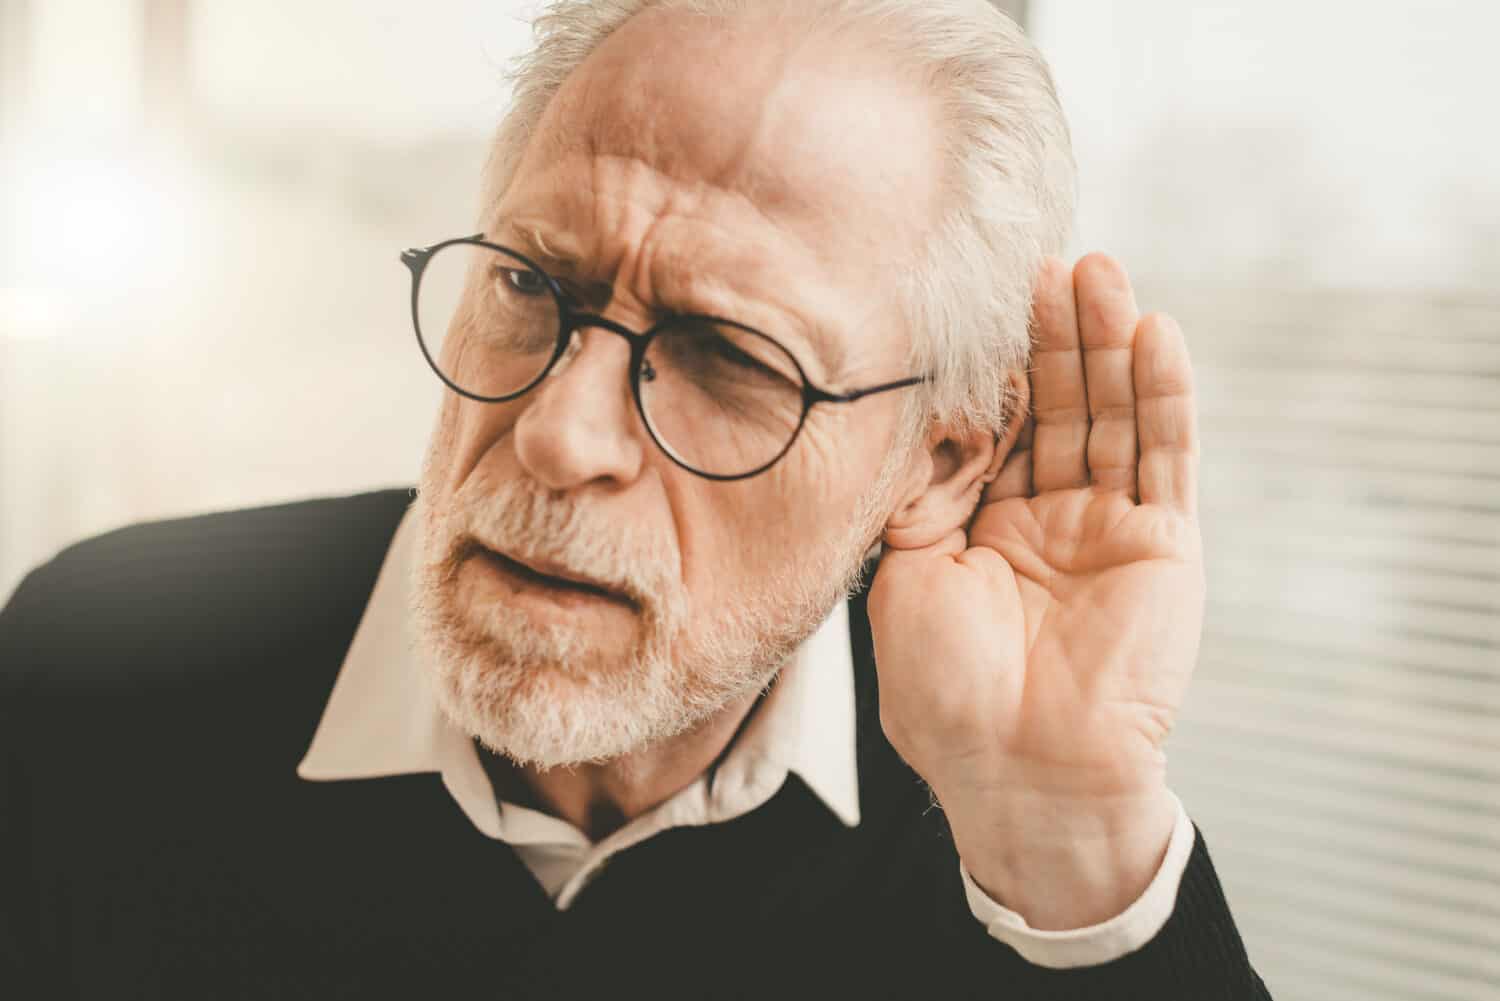 senior with age-related hearing loss cupping his ear